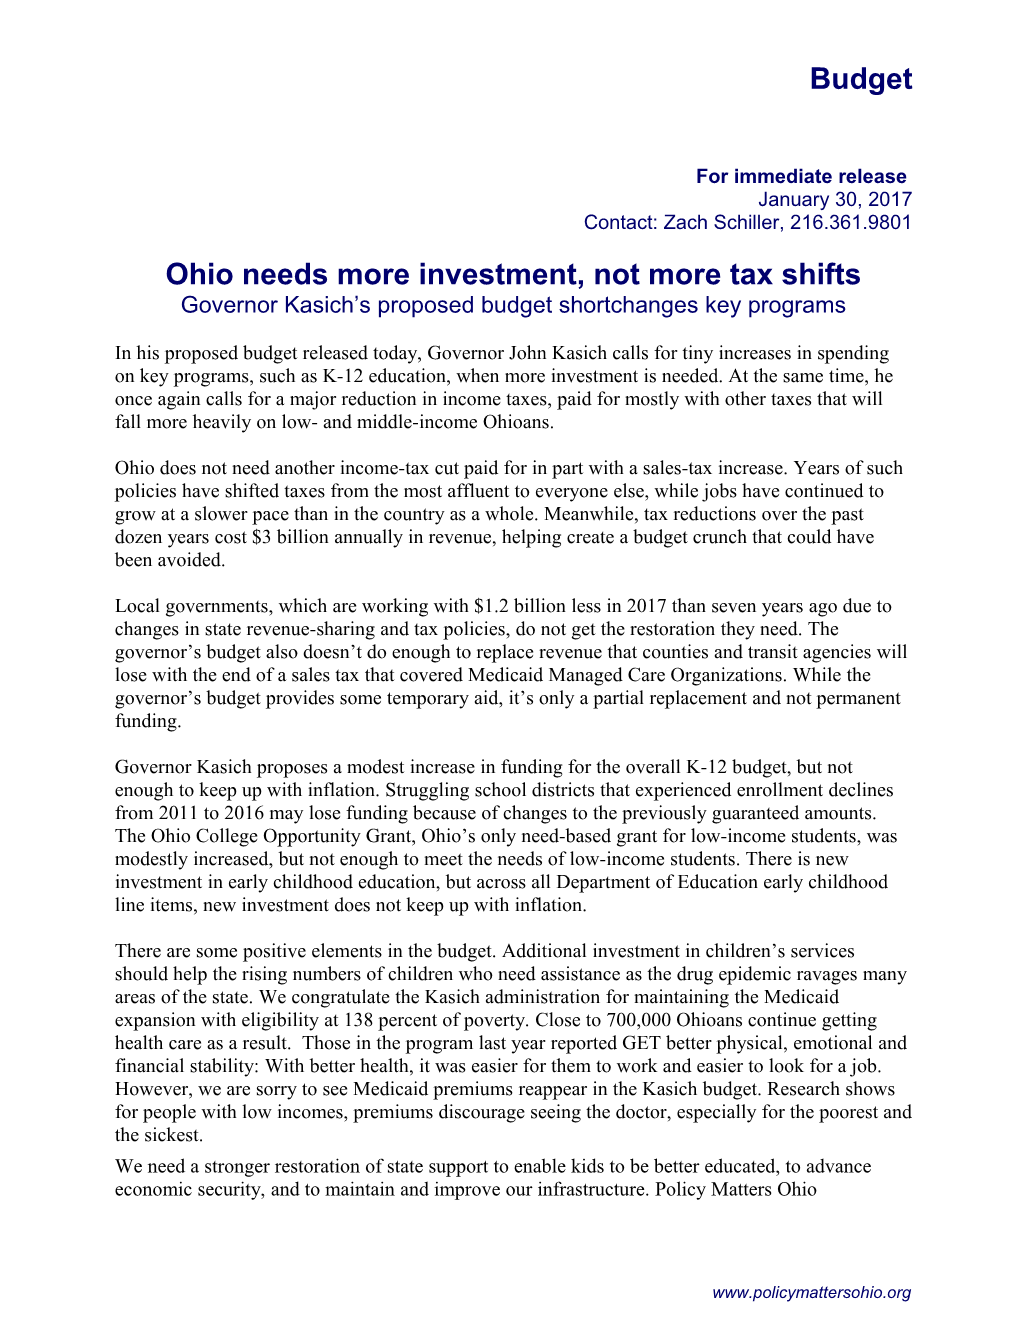 Ohio Needs More Investment, Not More Tax Shifts